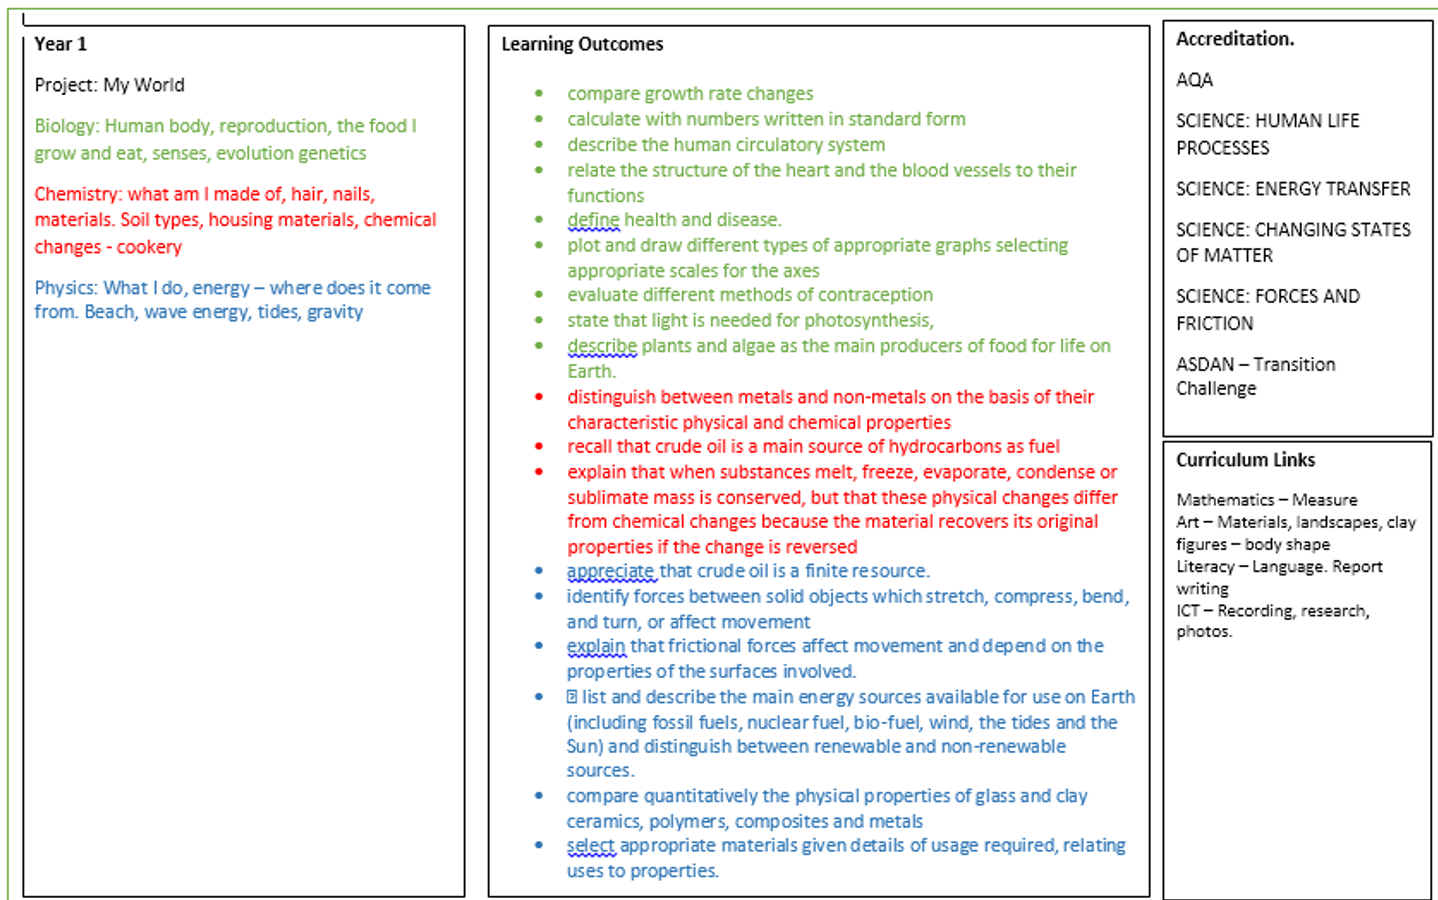 Example of topic based science curriuclum learning objectives for SEN pupils